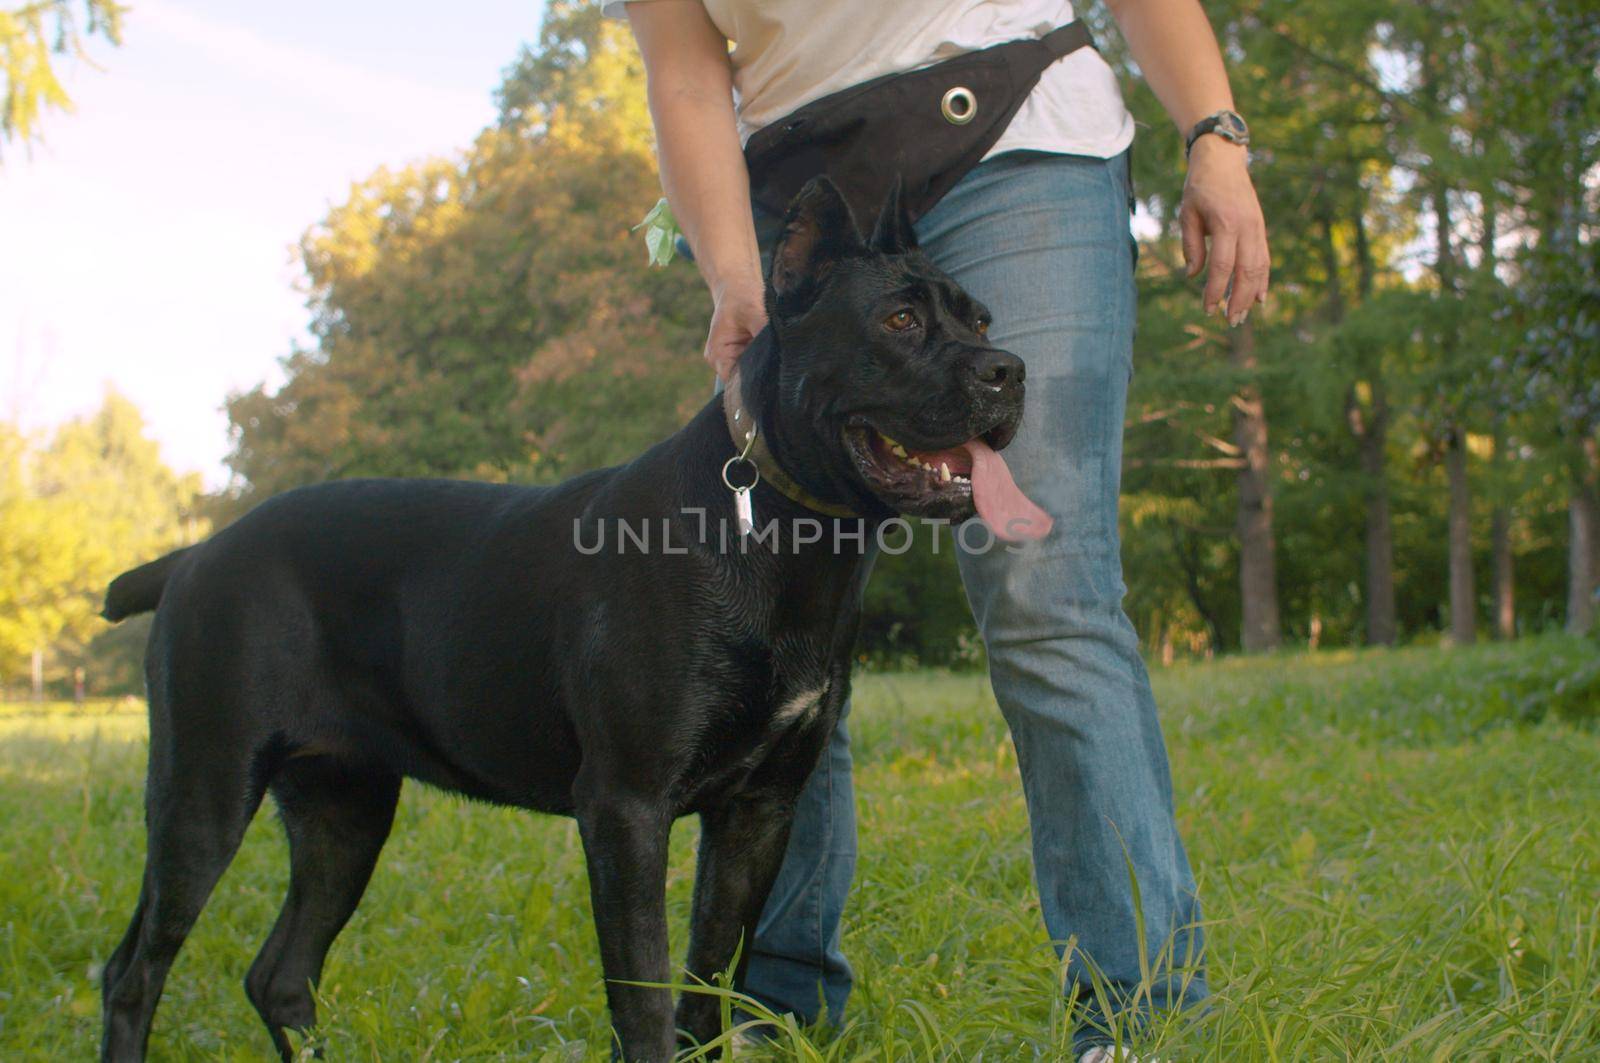 Big black dog and its owner in the park by Chudakov